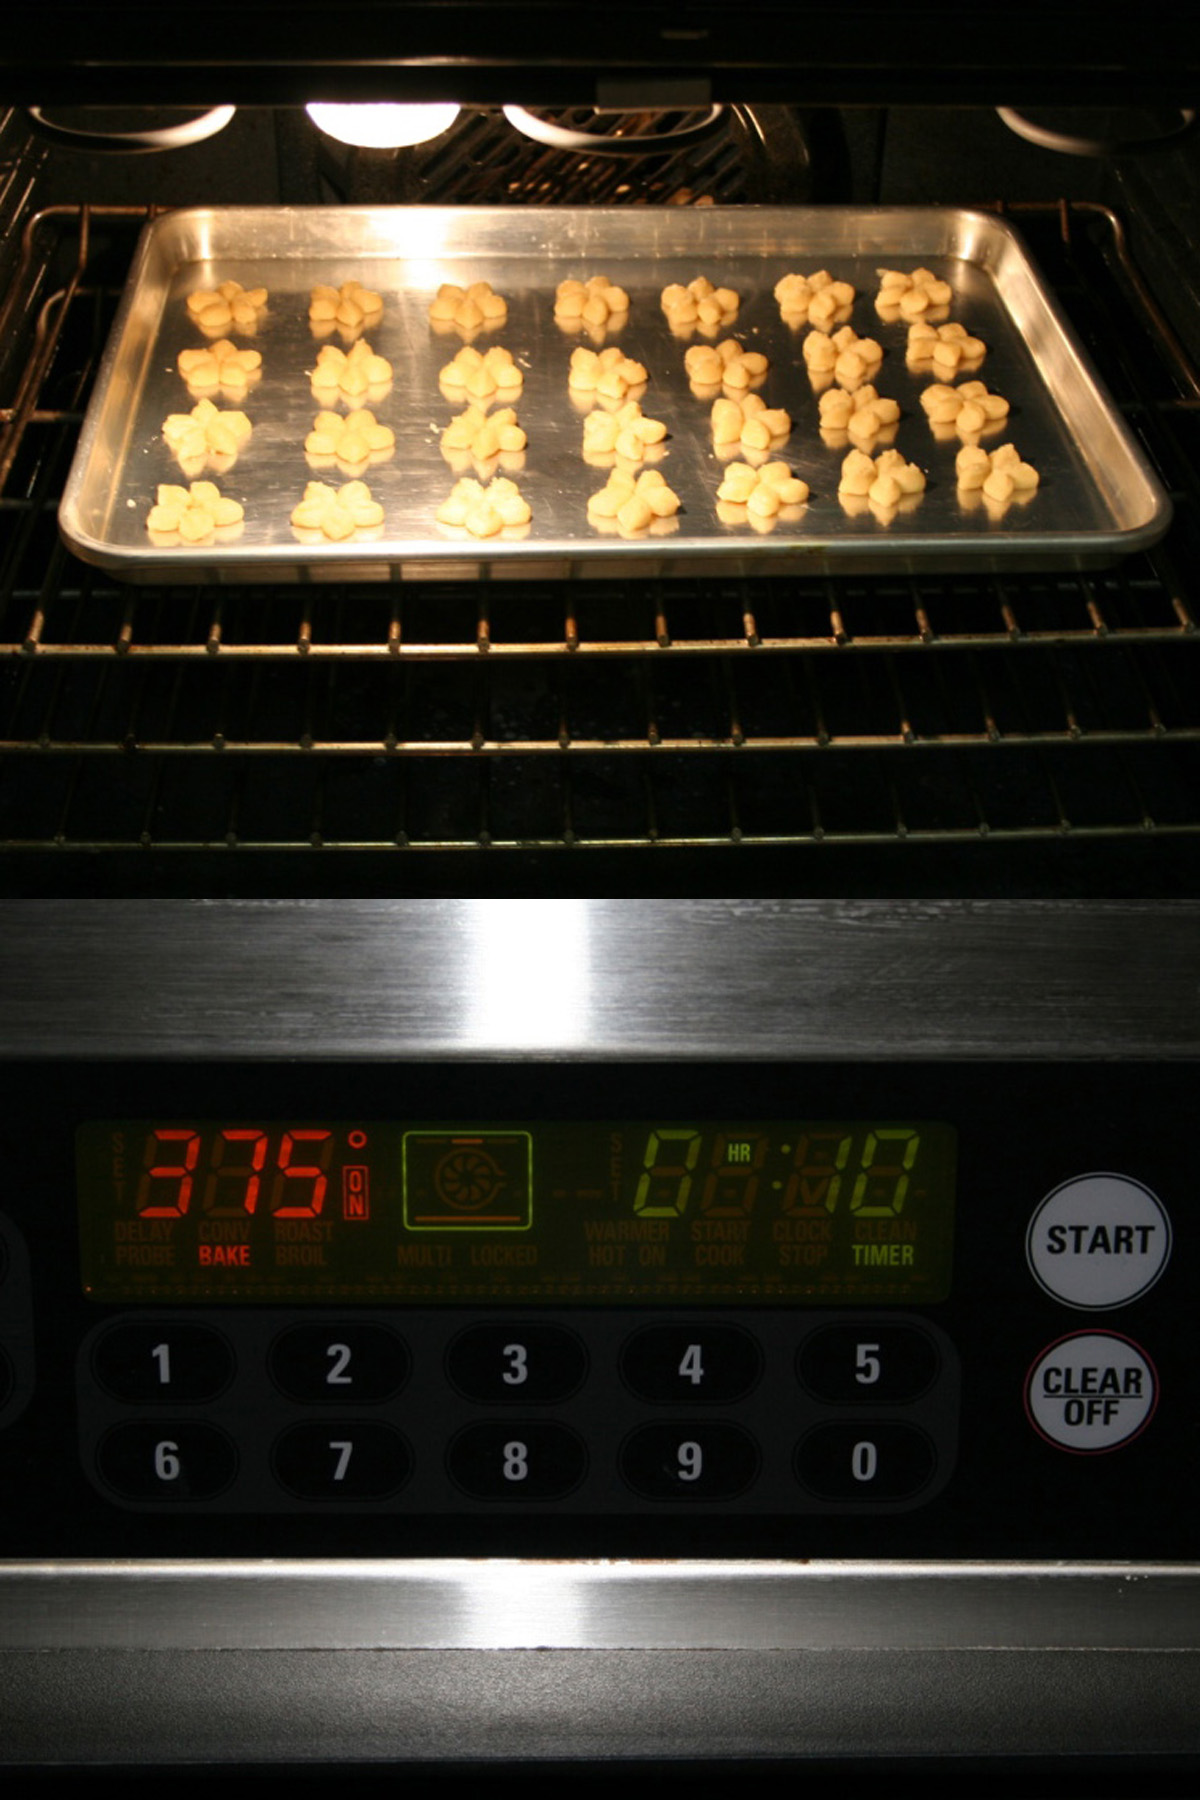 Putting the cookies into the oven